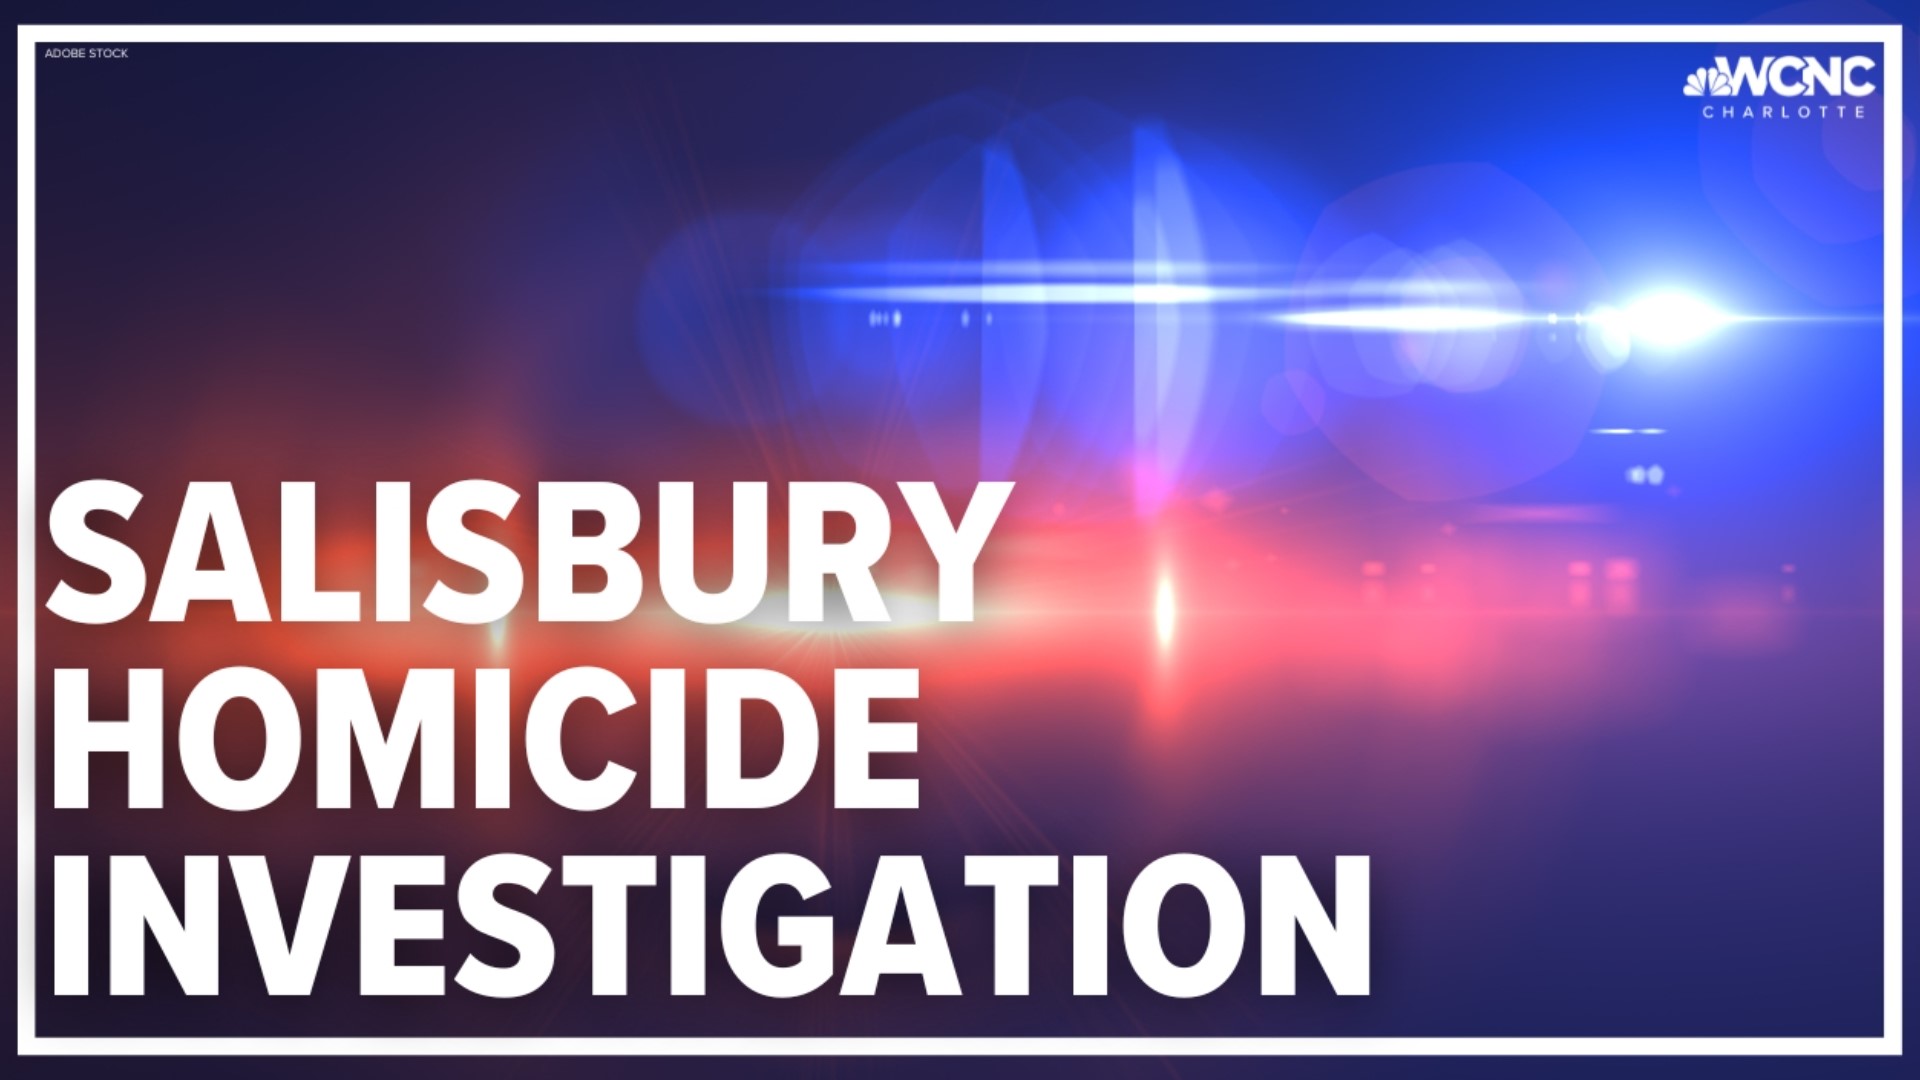 A man was killed following a shooting in Salisbury early Sunday morning, the Salisbury Police Department reports.